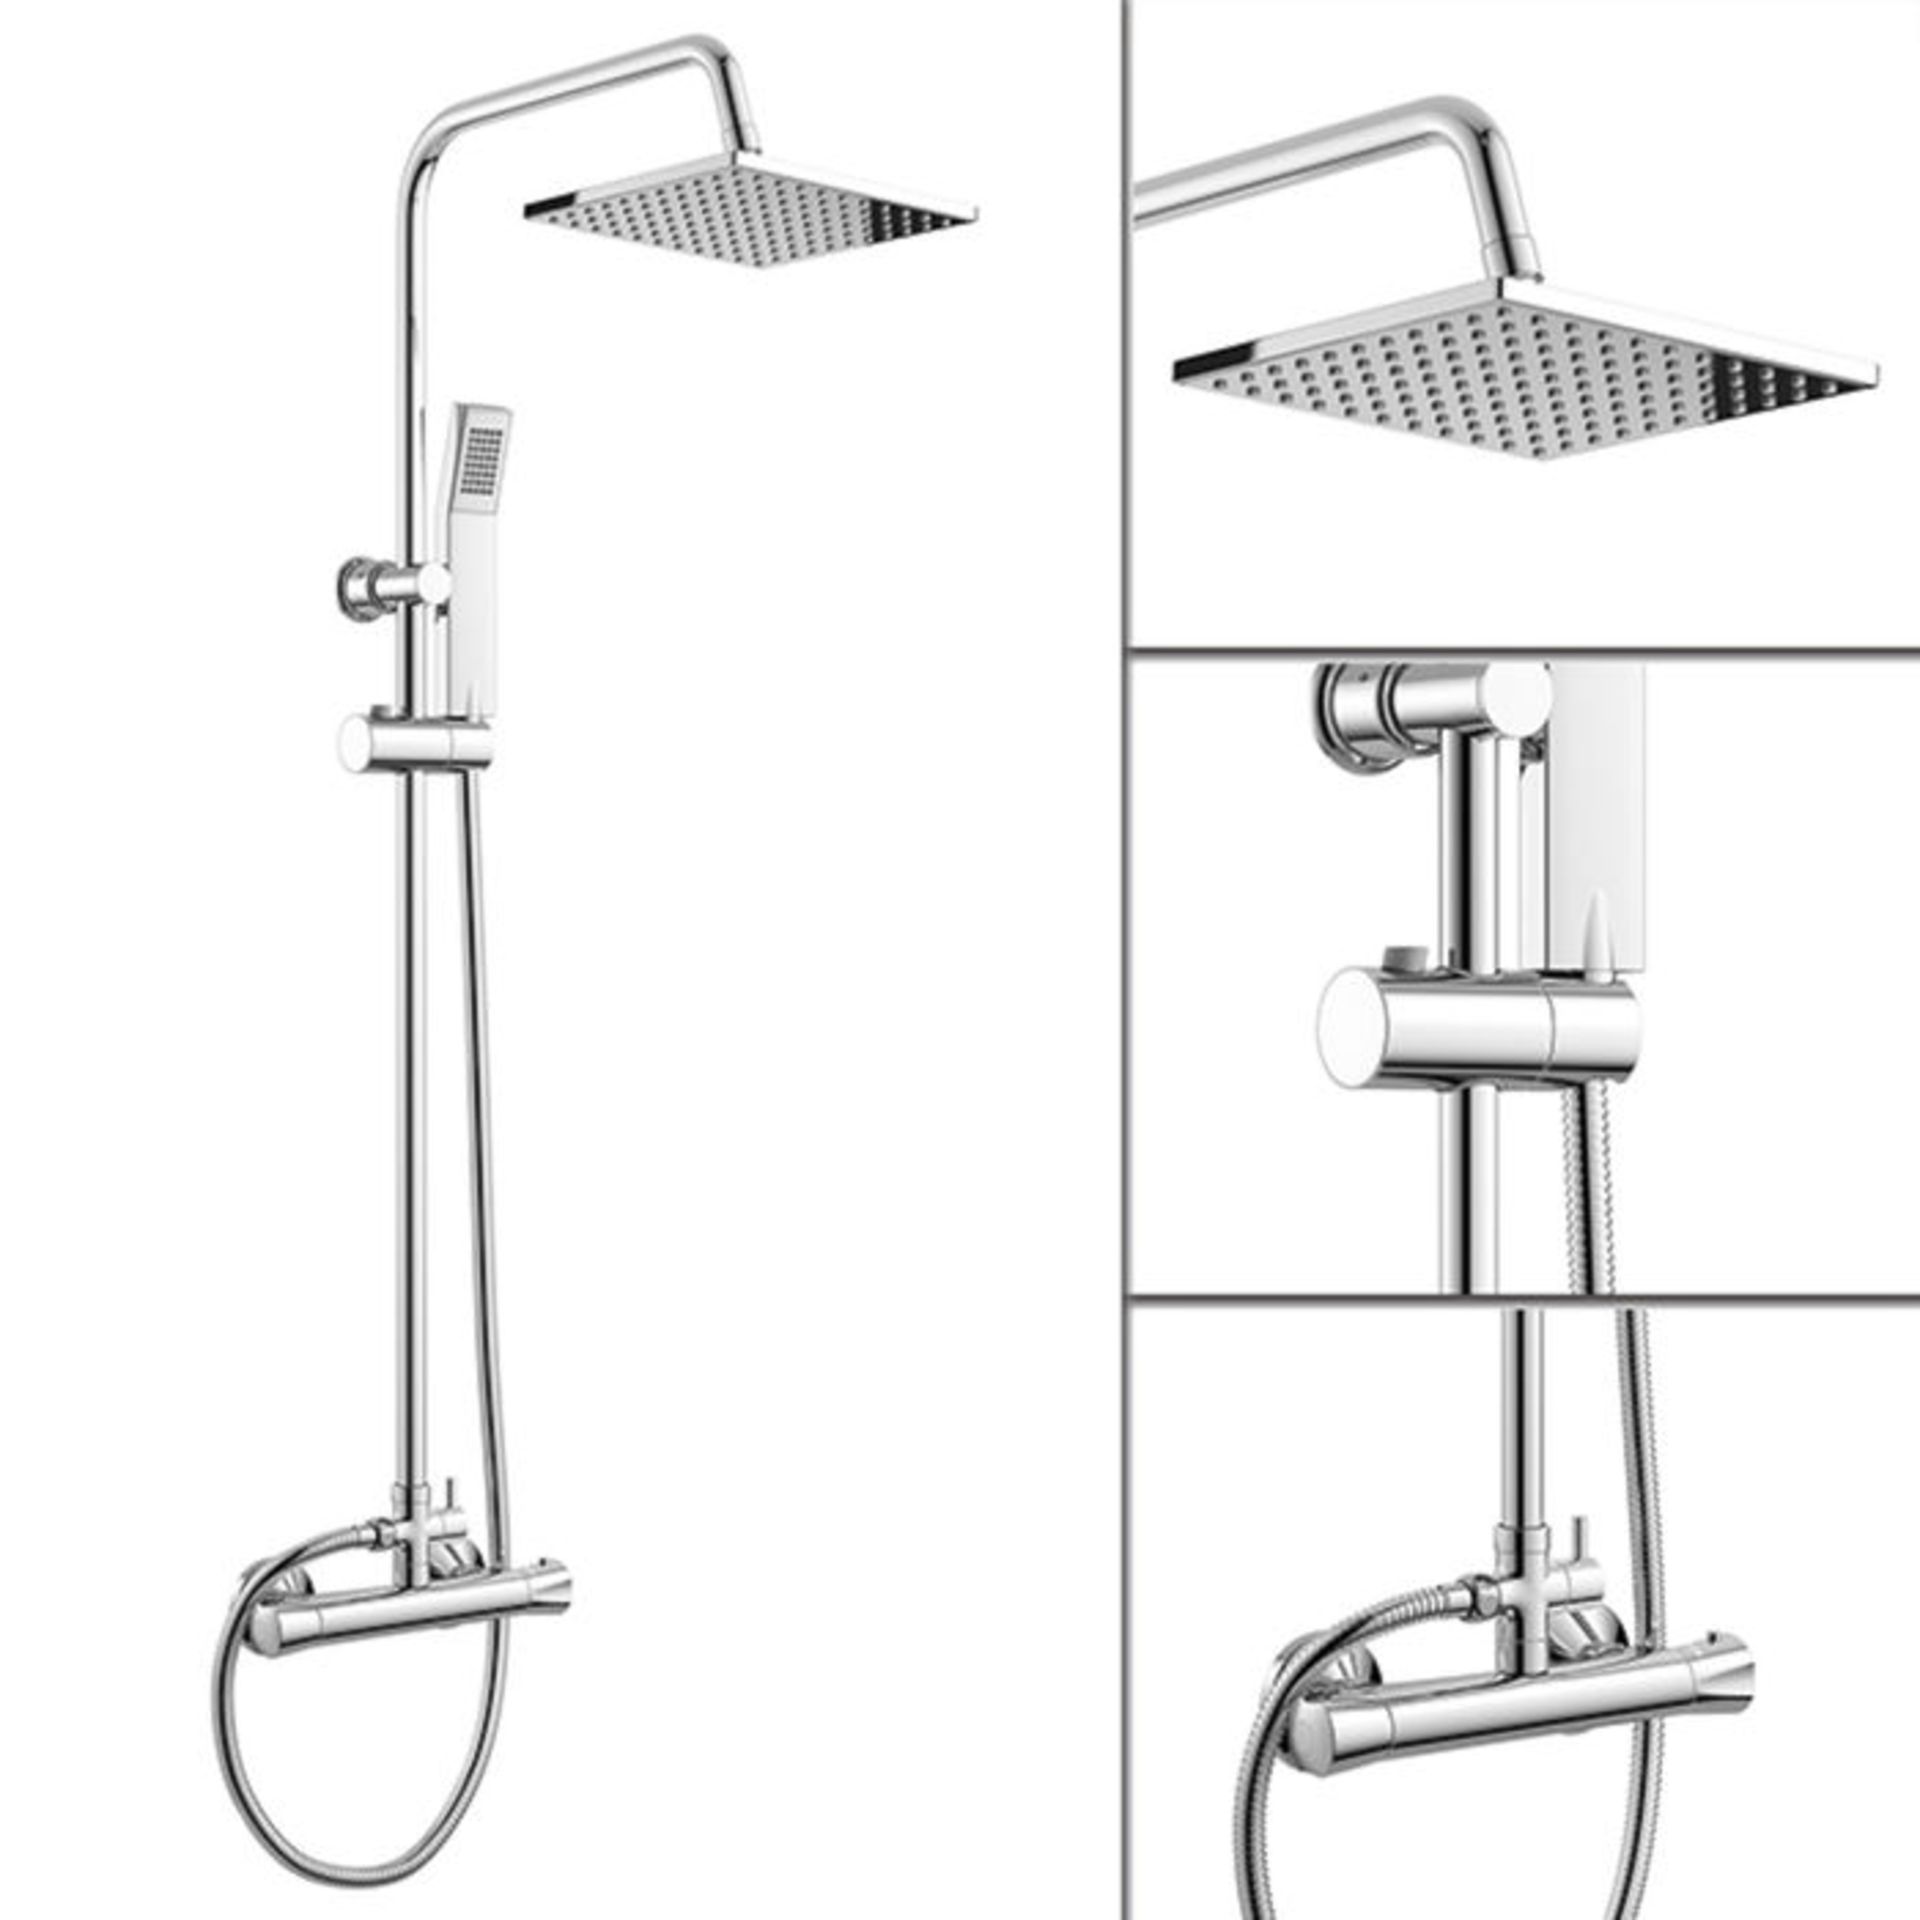 (RK124) Square Exposed Thermostatic Shower Kit & Head. Curved features and contemporary rounded...( - Image 2 of 2